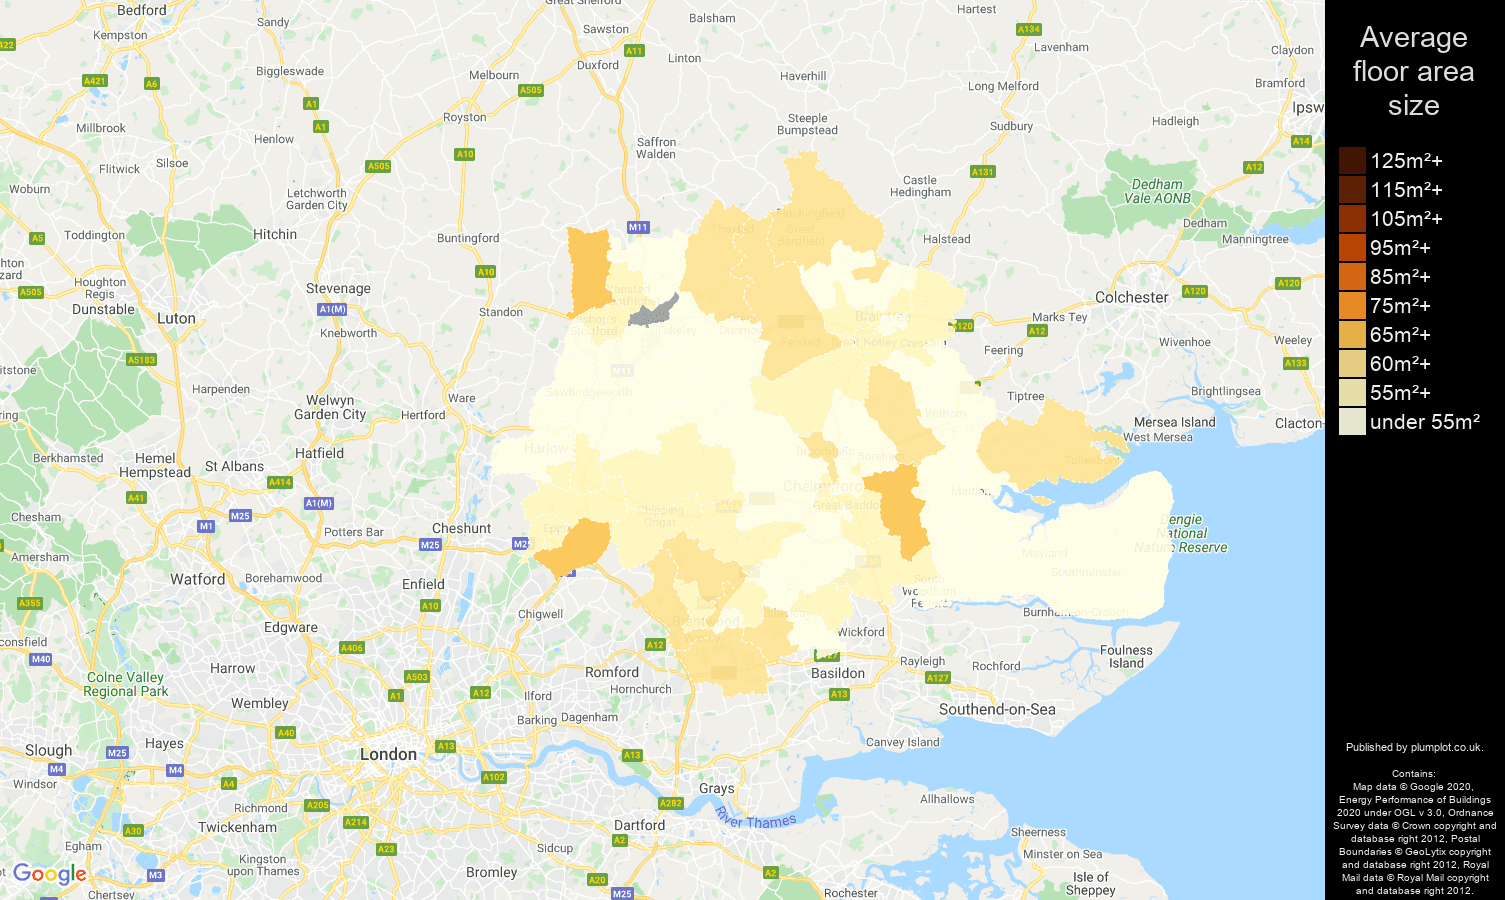 Chelmsford map of average floor area size of flats